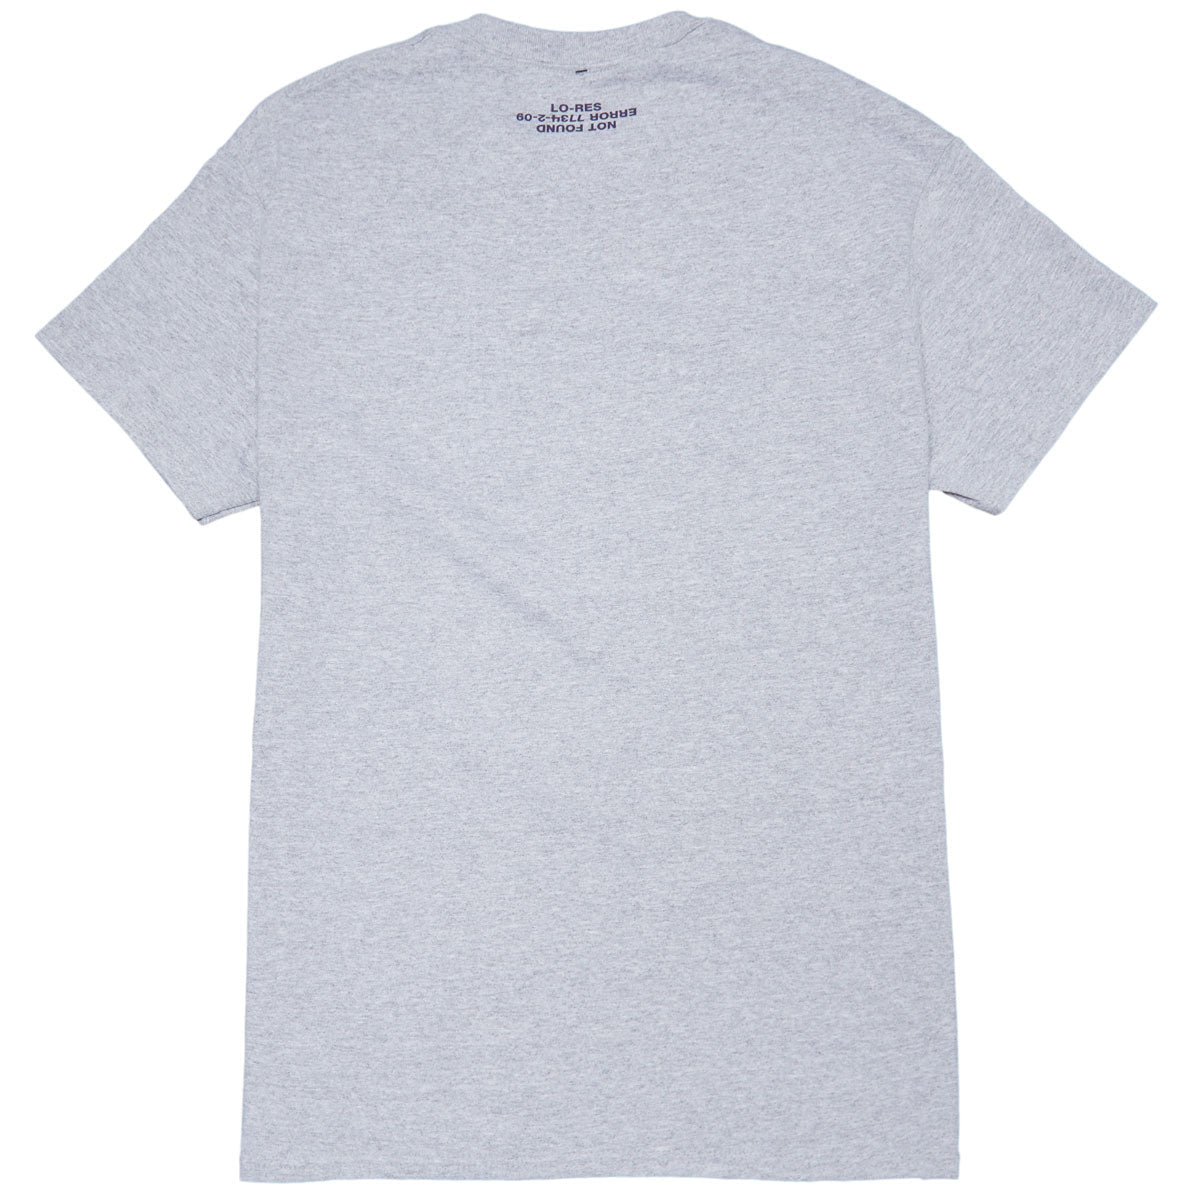 Lo-Res Ball T-Shirt - Heather Grey image 2